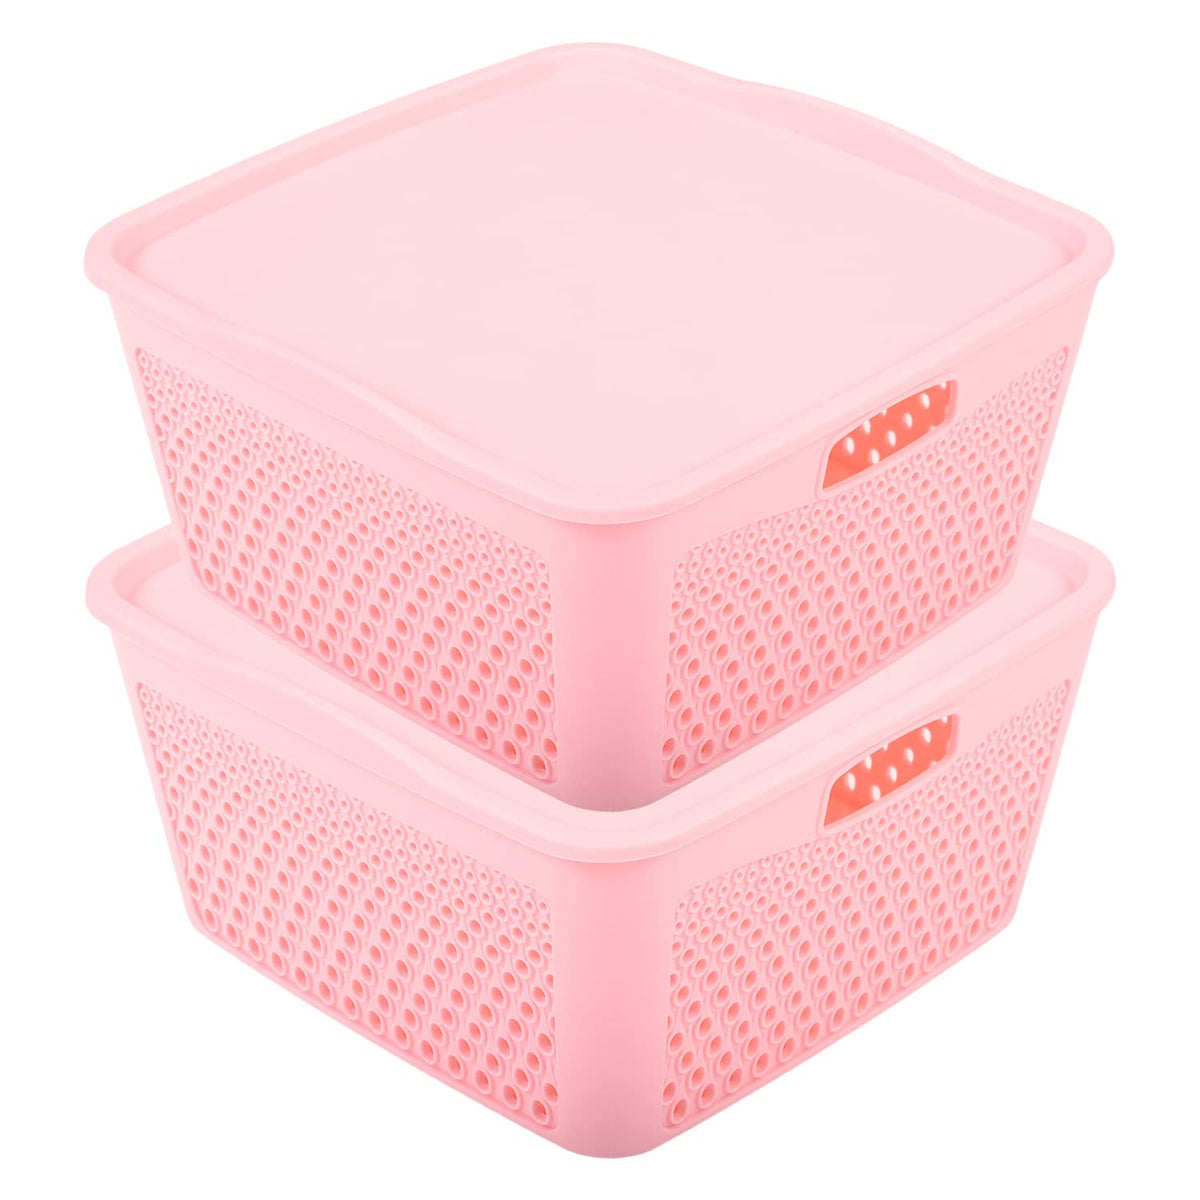 Kuber Industries Netted Design Unbreakable Multipurpose Square Shape Plastic Storage Baskets with lid Large Pack of 2 (Pink)